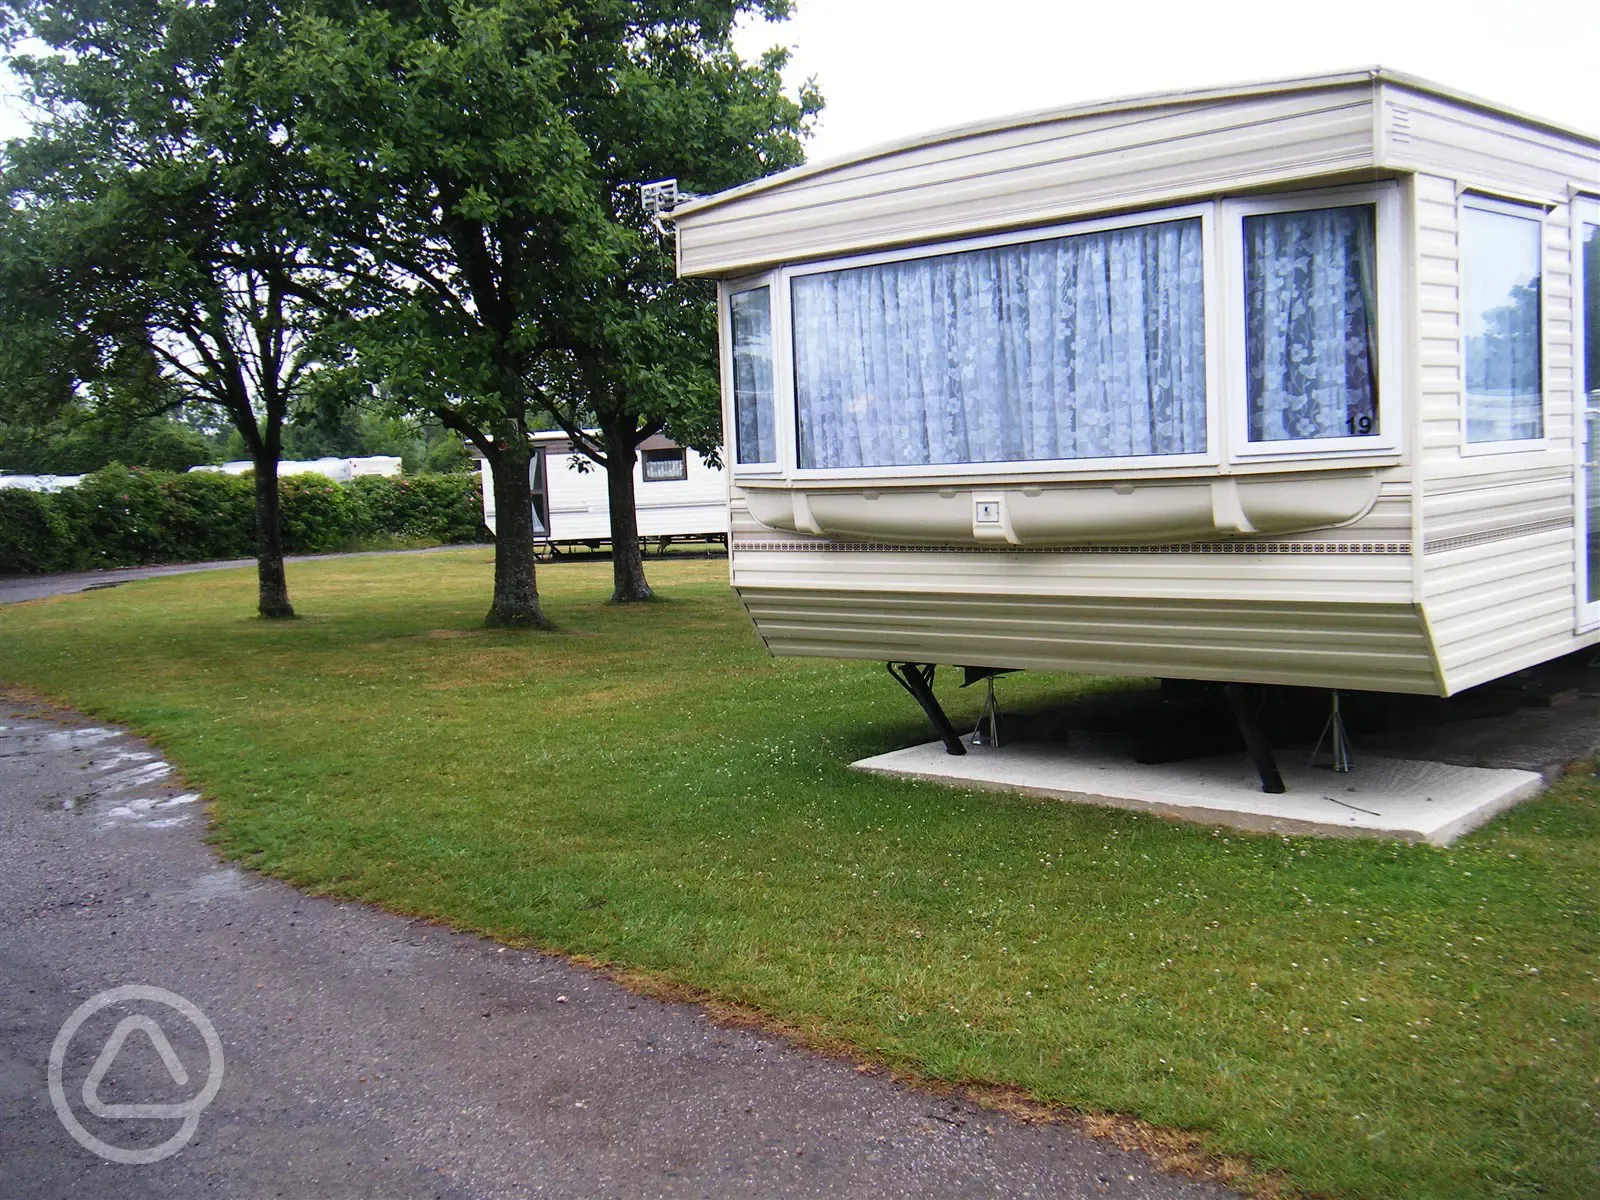 3 Bedroom Gold Caravans, 1 is kept pet free for those with allergies to pets